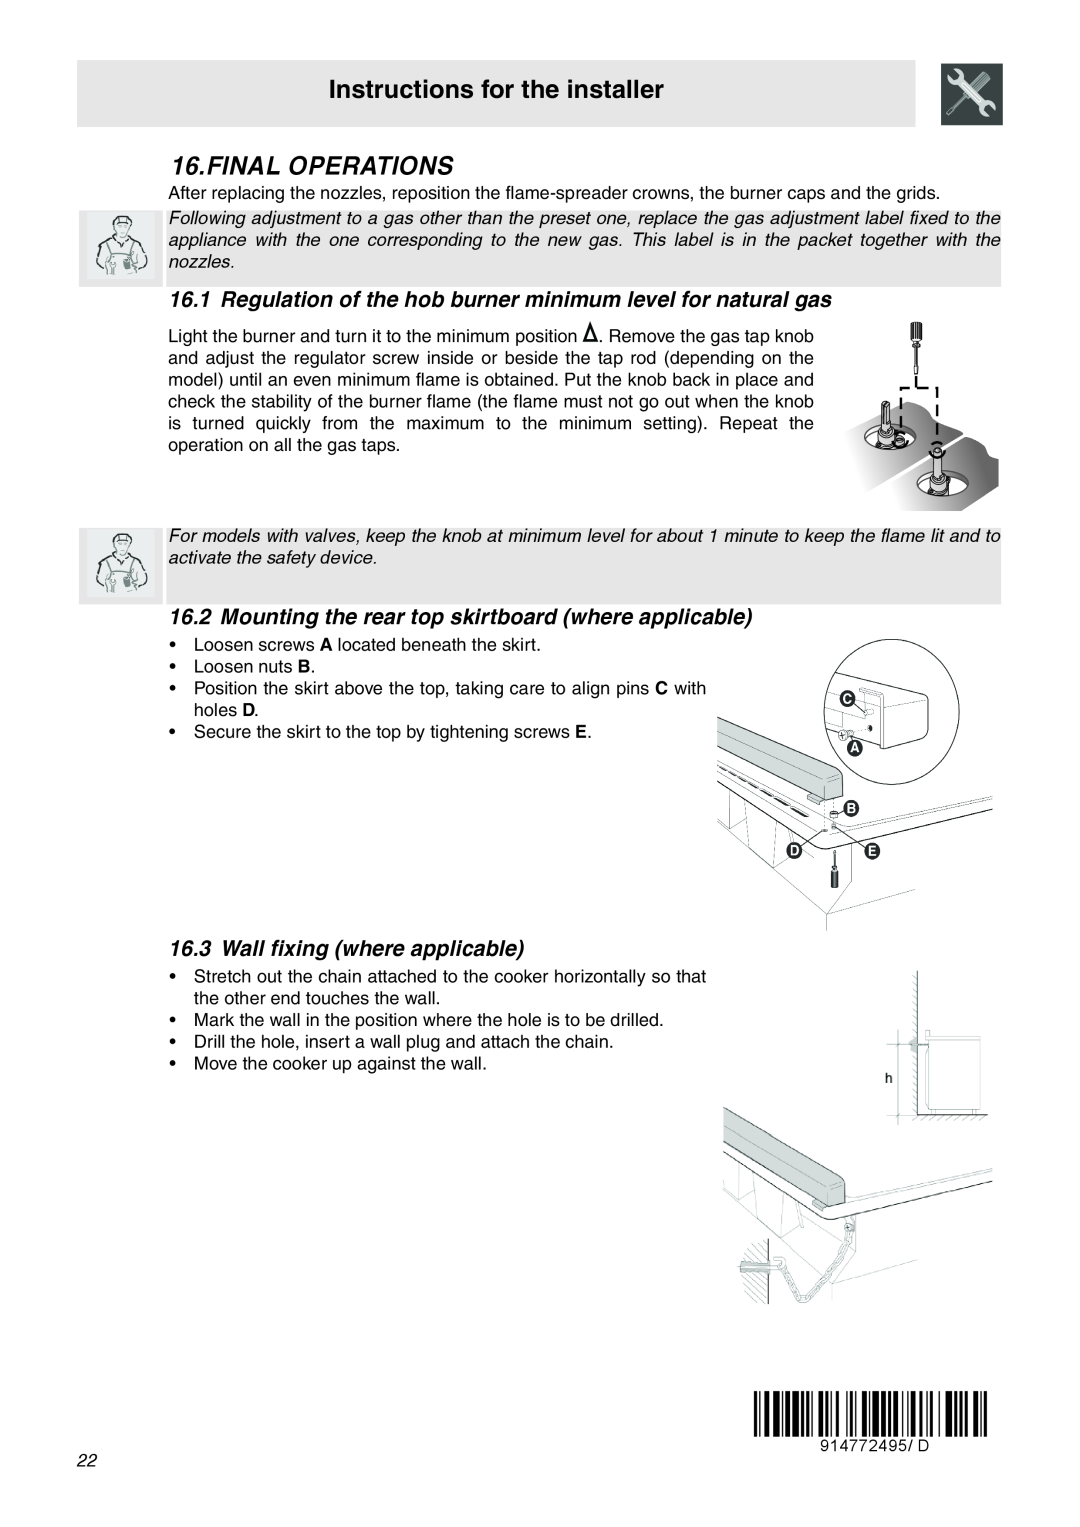 Smeg SNZ60EVX manual Final Operations, Wall fixing where applicable, Instructions for the installer 